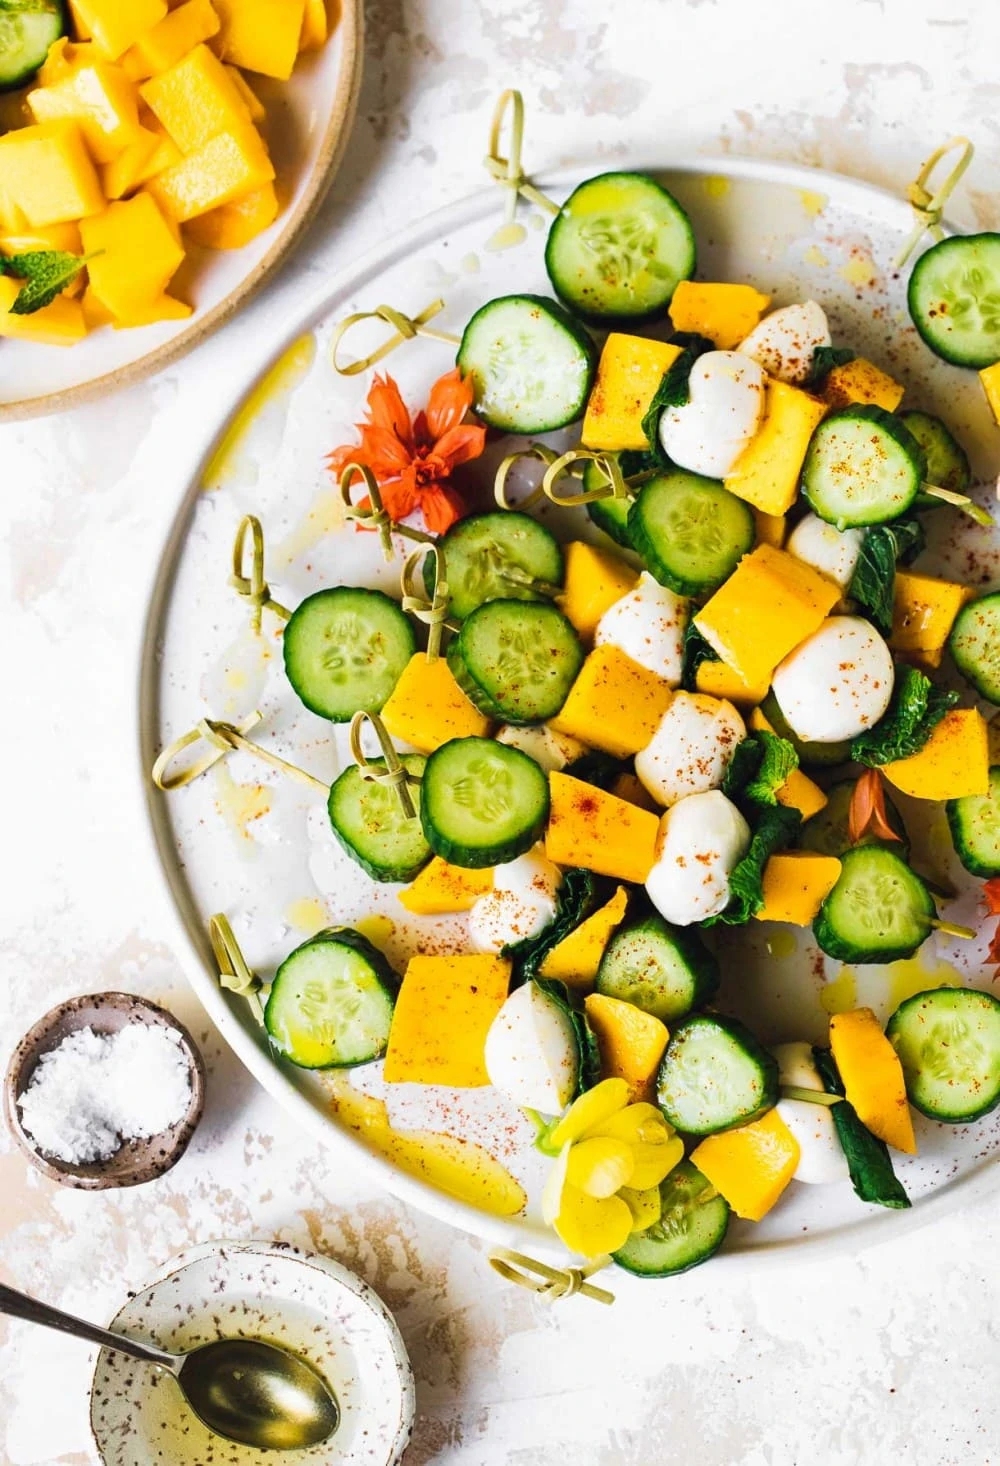 mango mozzarella cucumber skewers on a plate, with bowl of salt and white balsamic vinegar next to it